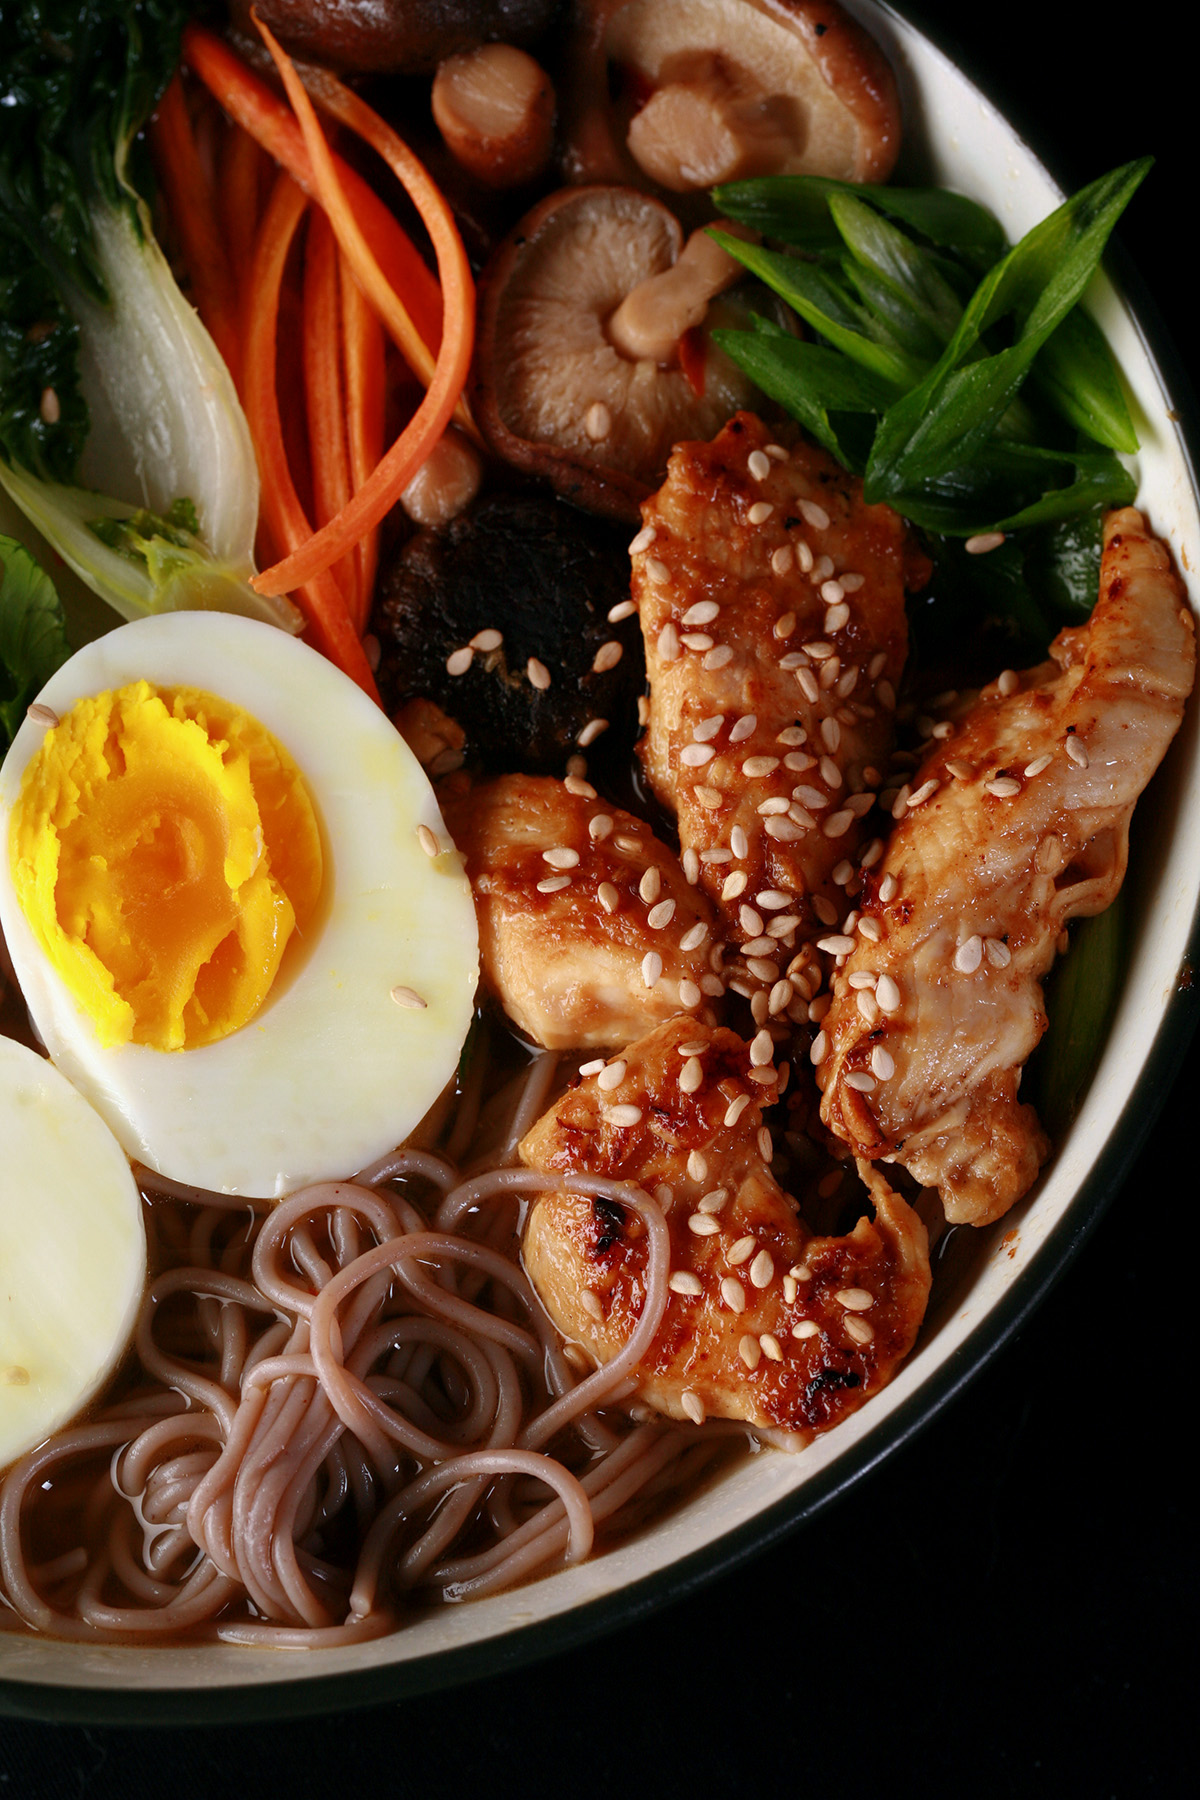 A bowl of gluten-free ramen, with chicken and vegetables.